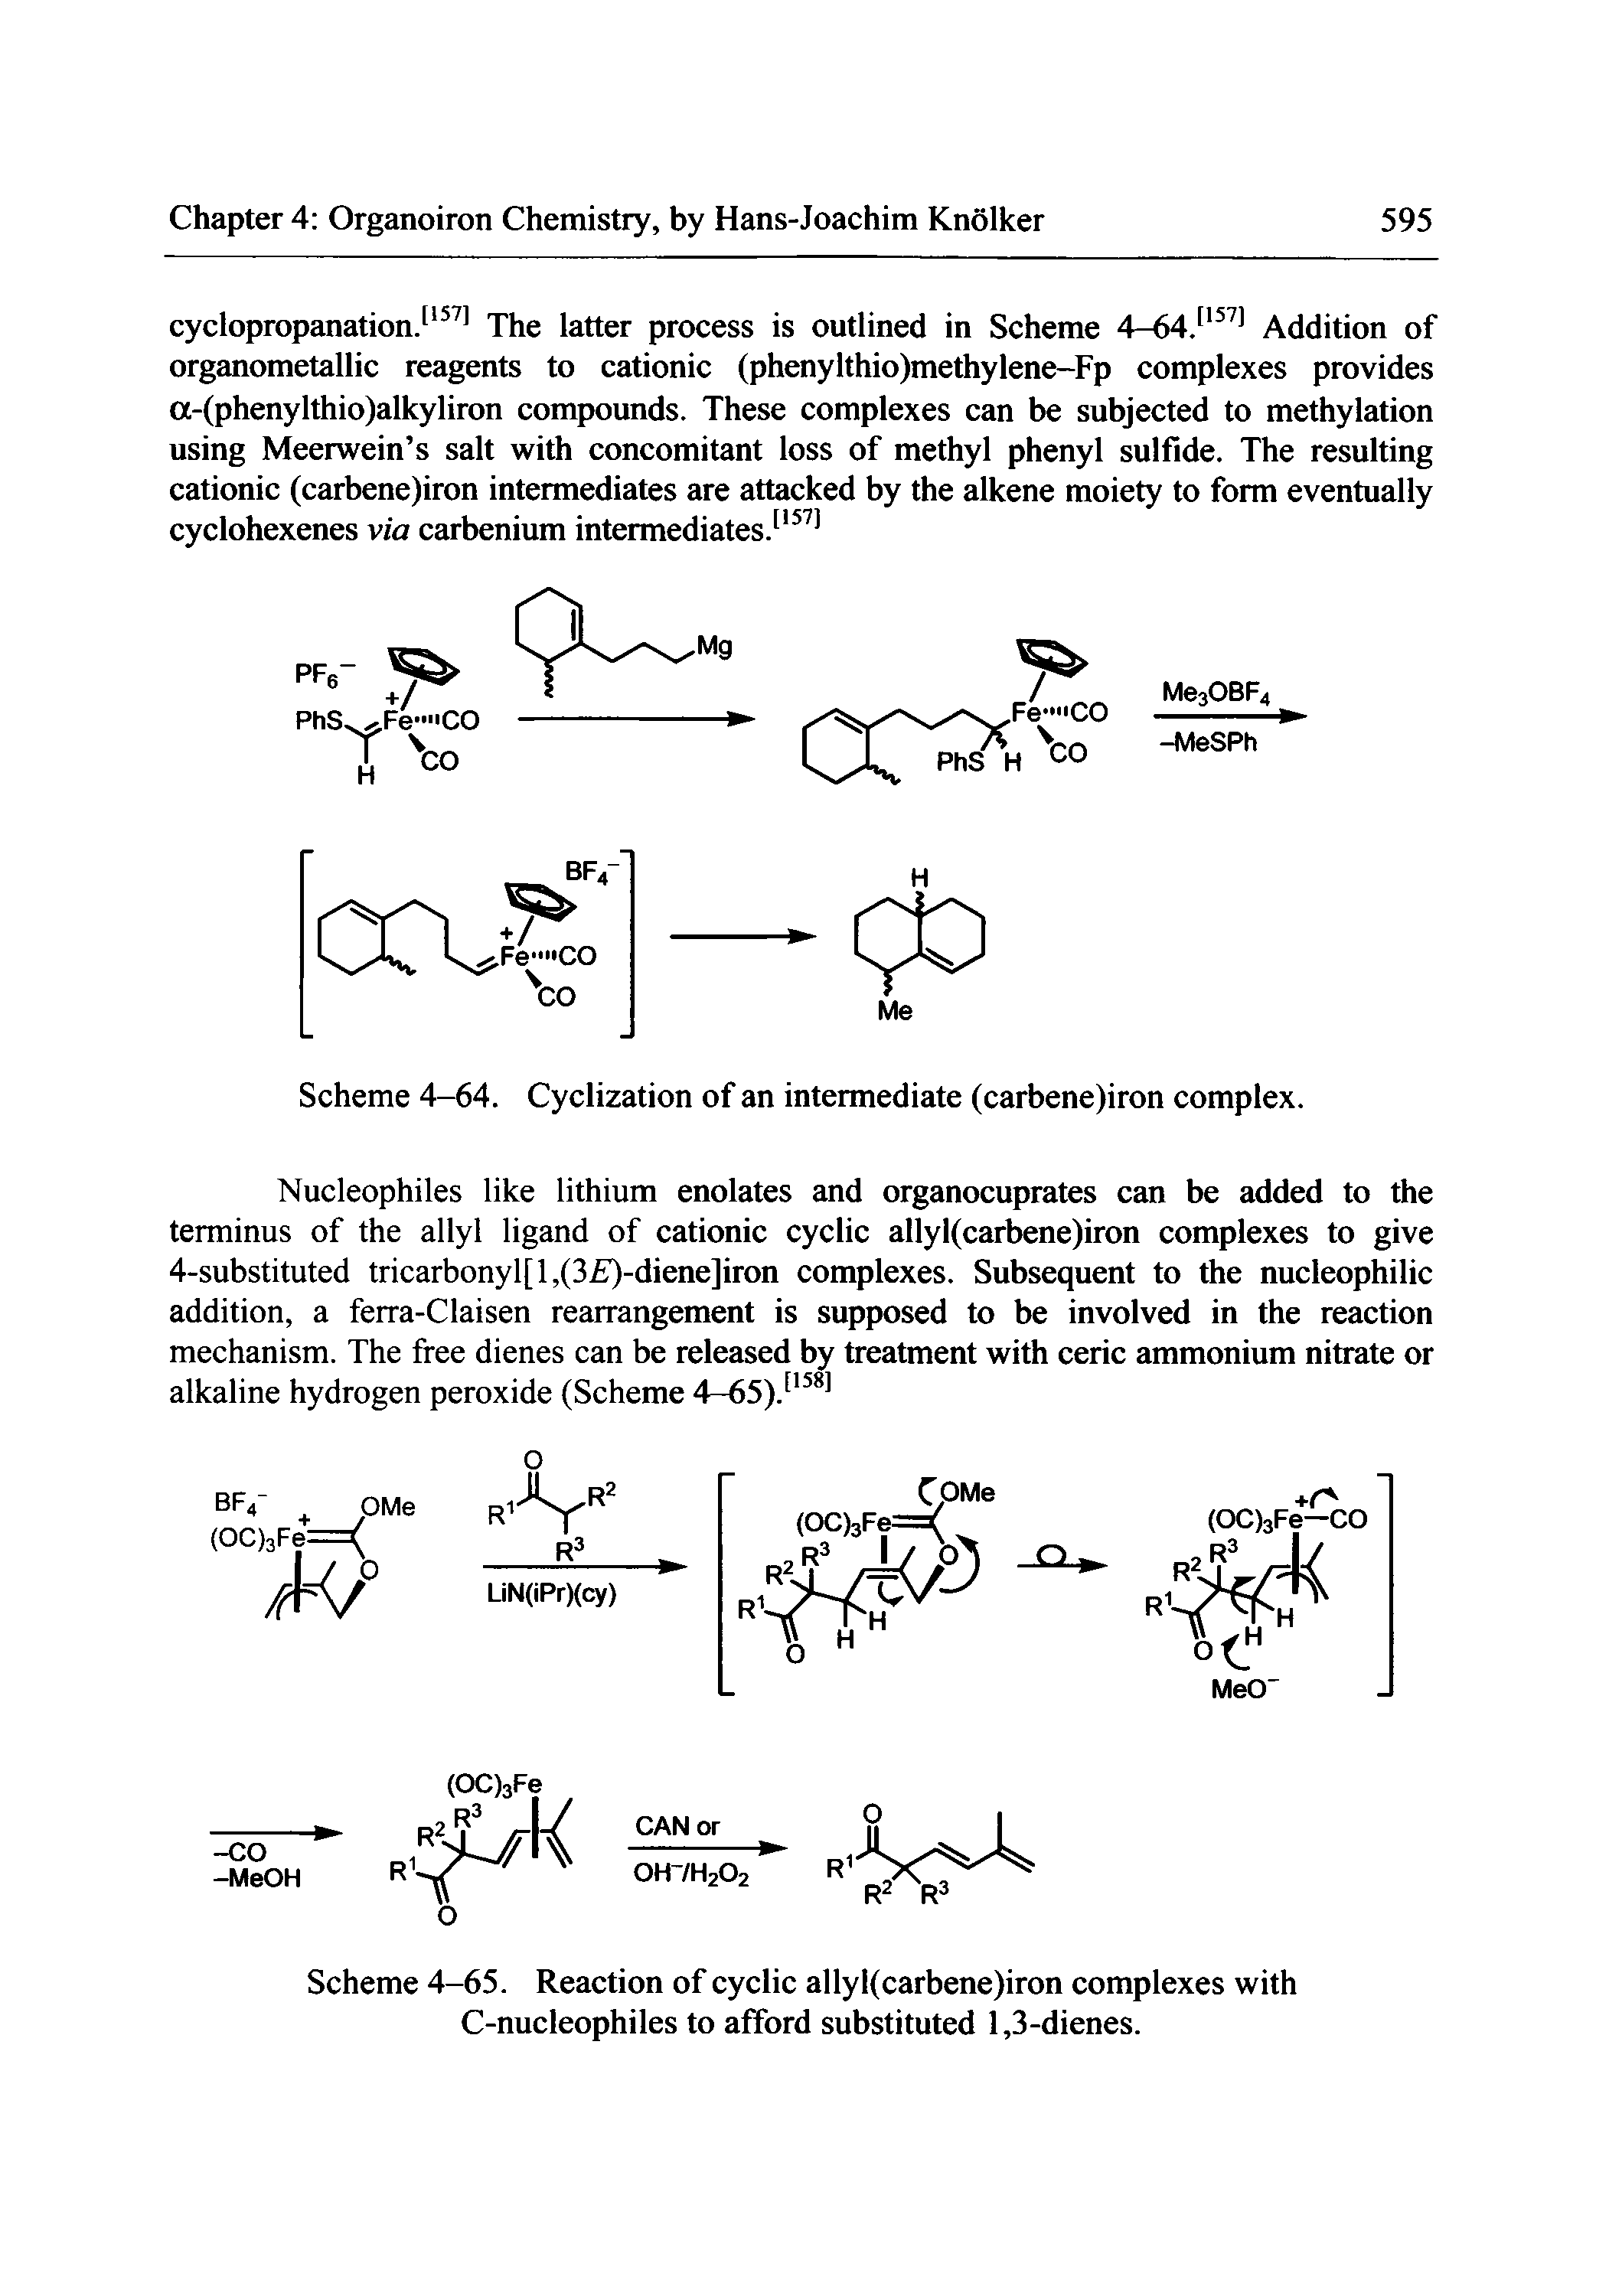 Scheme 4-65. Reaction of cyclic allyl(carbene)iron complexes with C-nucleophiles to afford substituted 1,3-dienes.